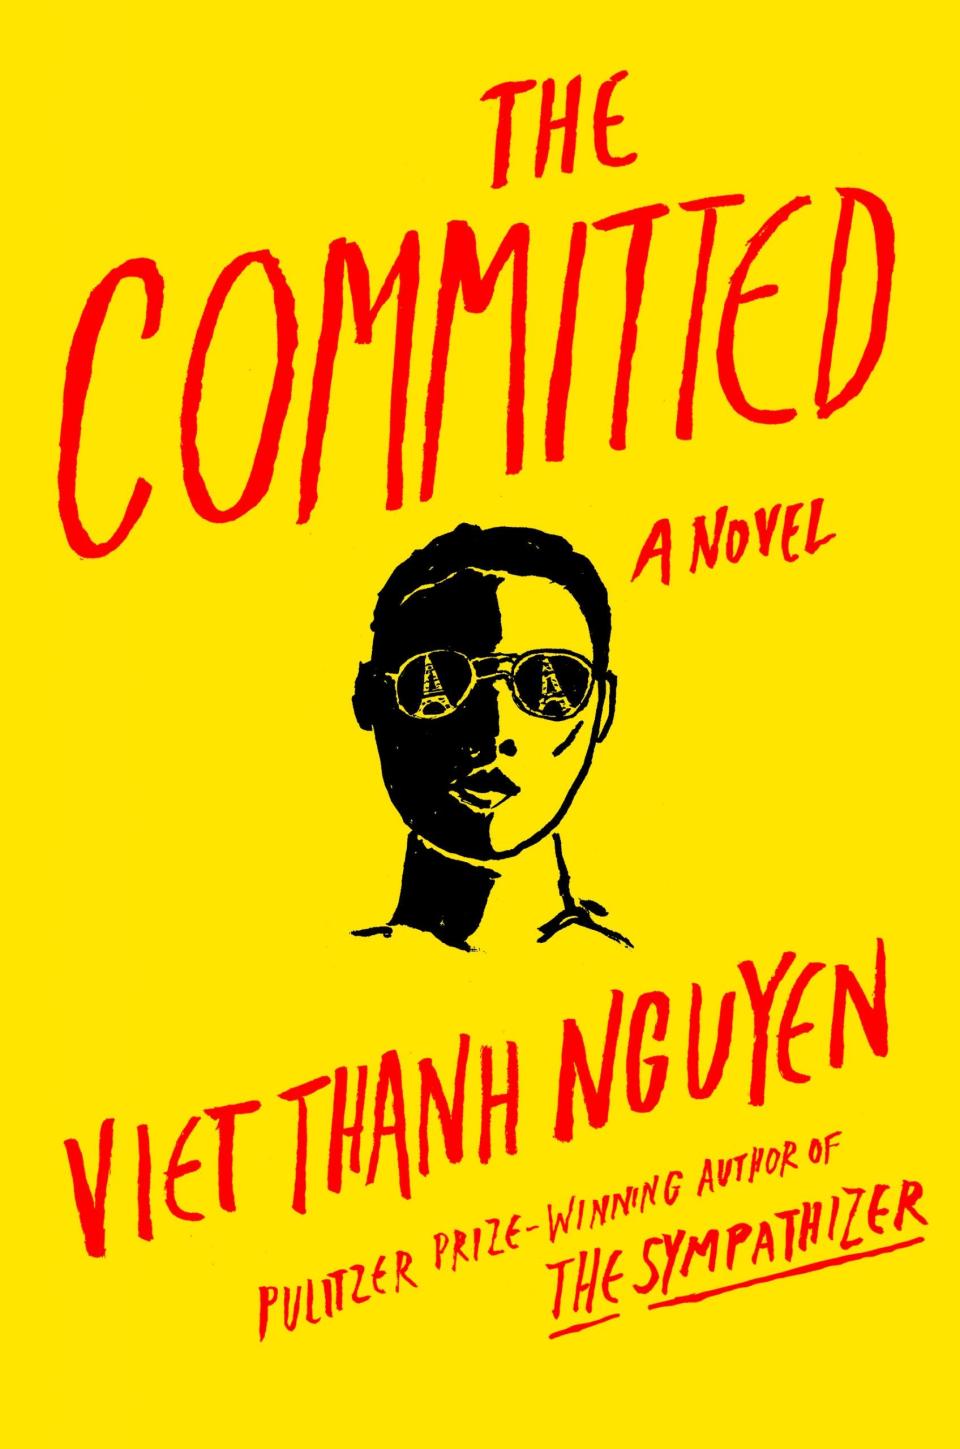 “The Committed,” by Viet Thanh Nguyen.